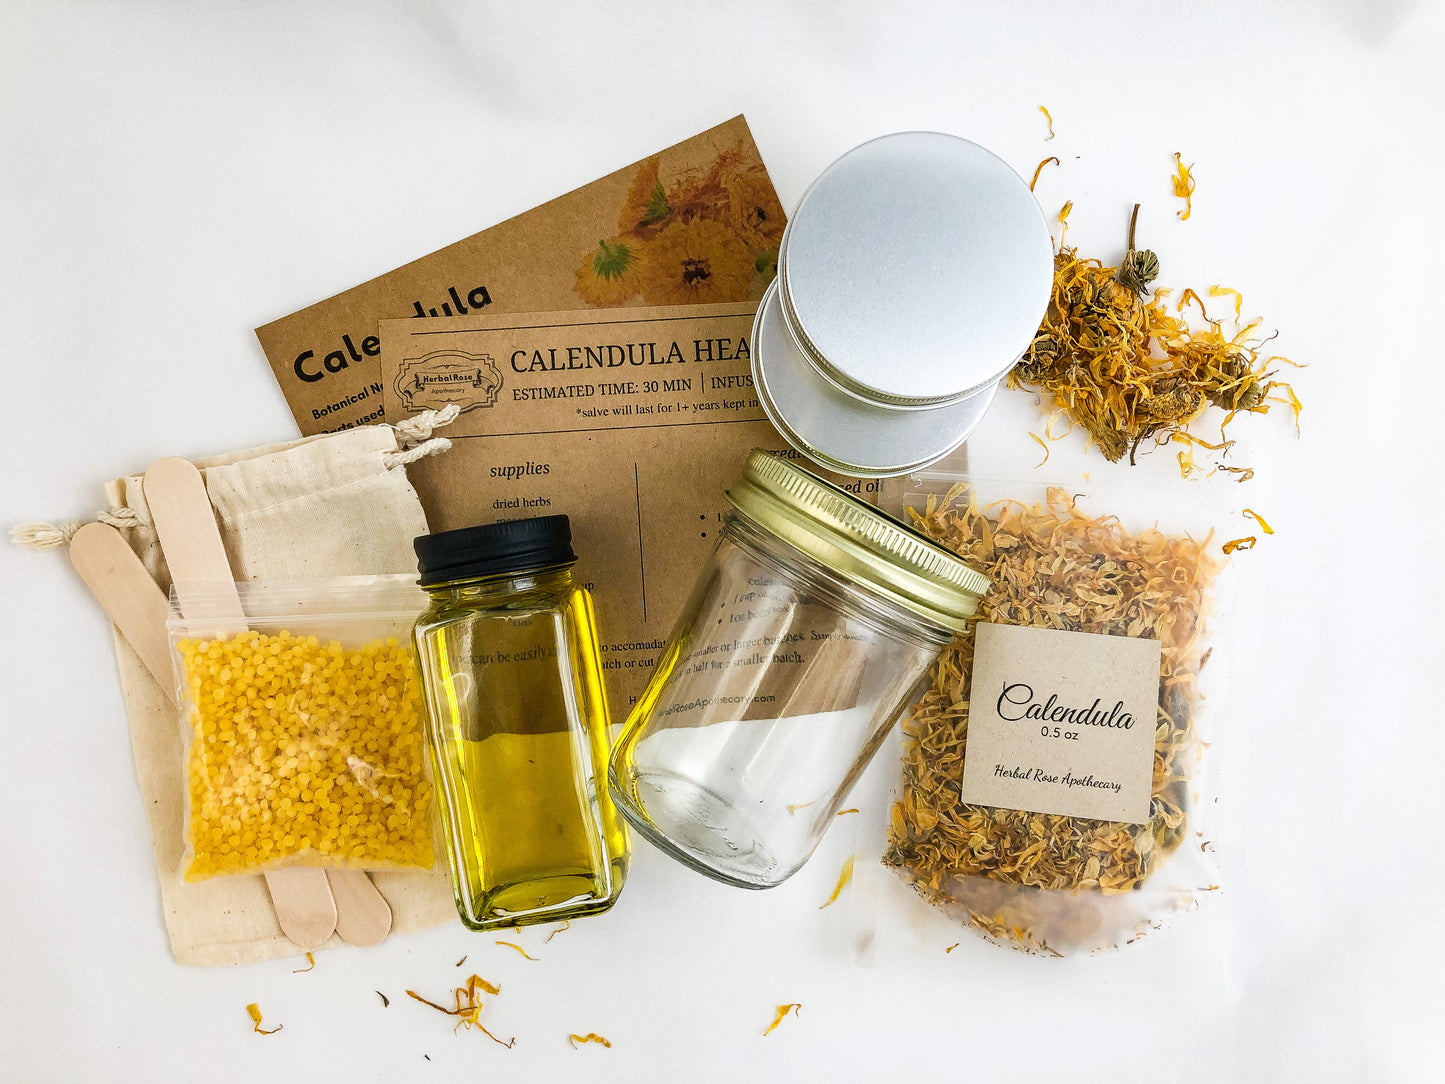 calendula oil and salve making kit on white background. Kit includes calendula monograph, step by step directions, 2 metal tins, dried calendula, mason jar, carrier oil, muslin bag, 2 tongue depressors, and beeswax